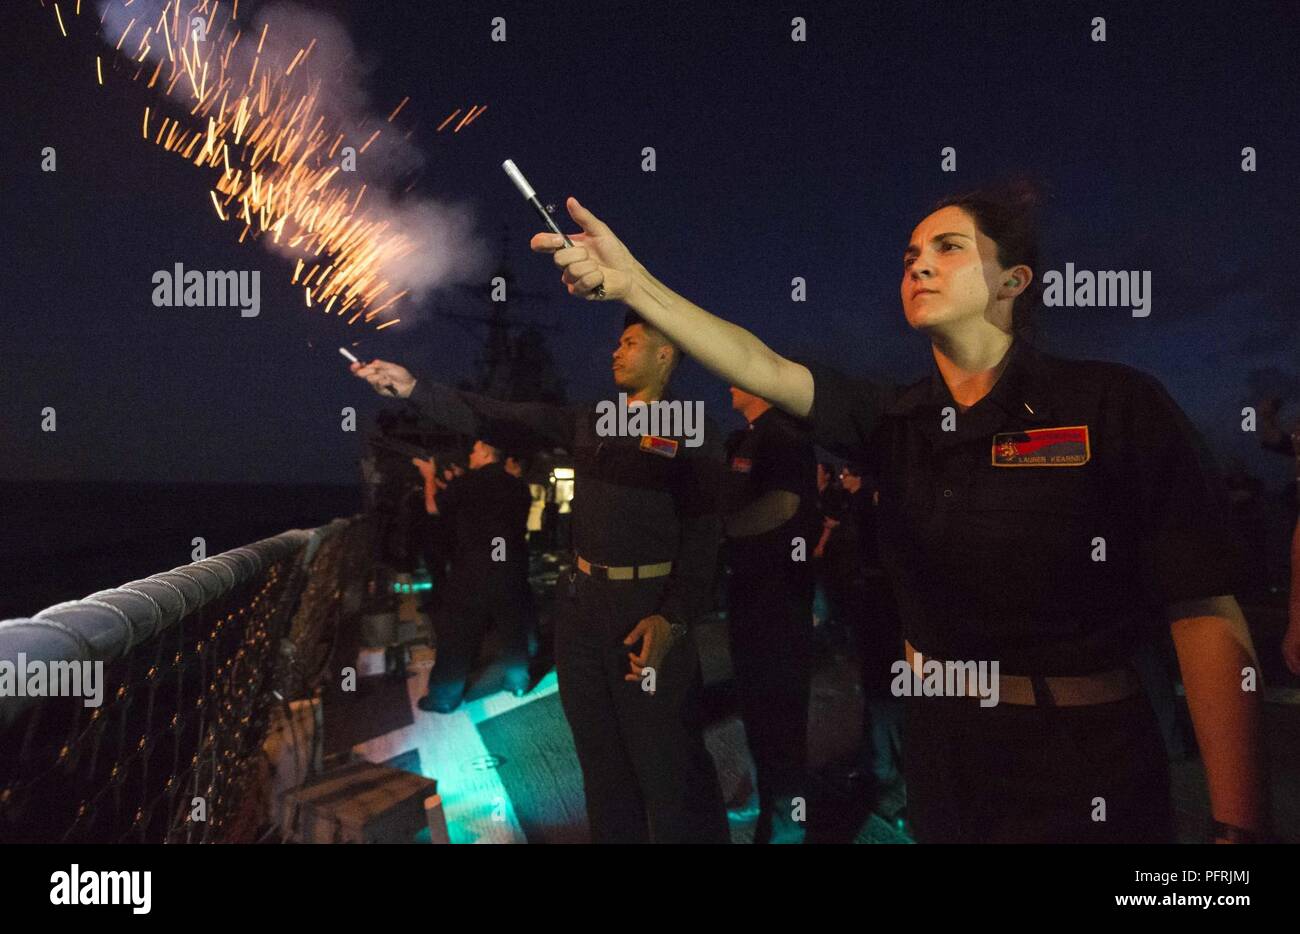 PHILIPPINE SEA (May 28, 2018) Ensign Lauren Kearney, the strike officer aboard the Arleigh Burke-class guided-missile destroyer USS Benfold (DDG 65), lights off pencil flares from the ship’s fantail after a promotion ceremony on Memorial Day. Benfold frocked 38 Sailors to the next paygrade and promoted 6 officers to lieutenant junior grade on Memorial Day while underway. Benfold is forward-deployed to the U.S. 7th fleet area of operations in support of security and stability in the Indo-Pacific region. Stock Photo